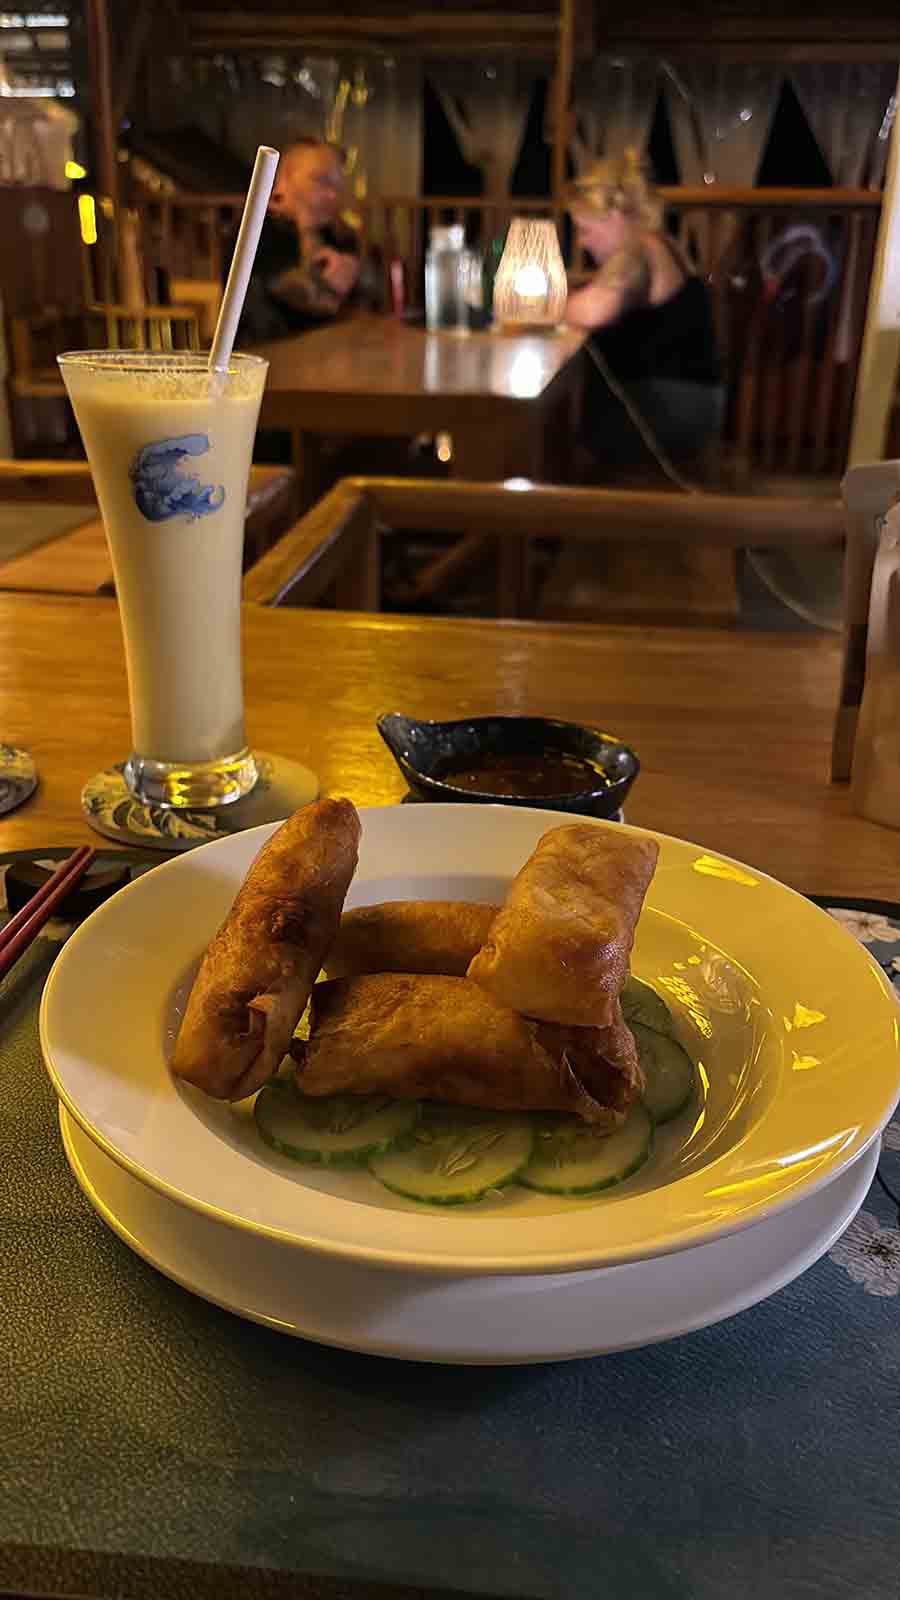 Apart from the local cuisine, I tried other food as well. Spring rolls at Haluo, a Chinese restaurant near my stay, where I went frequently because of their relatively reliable WiFi